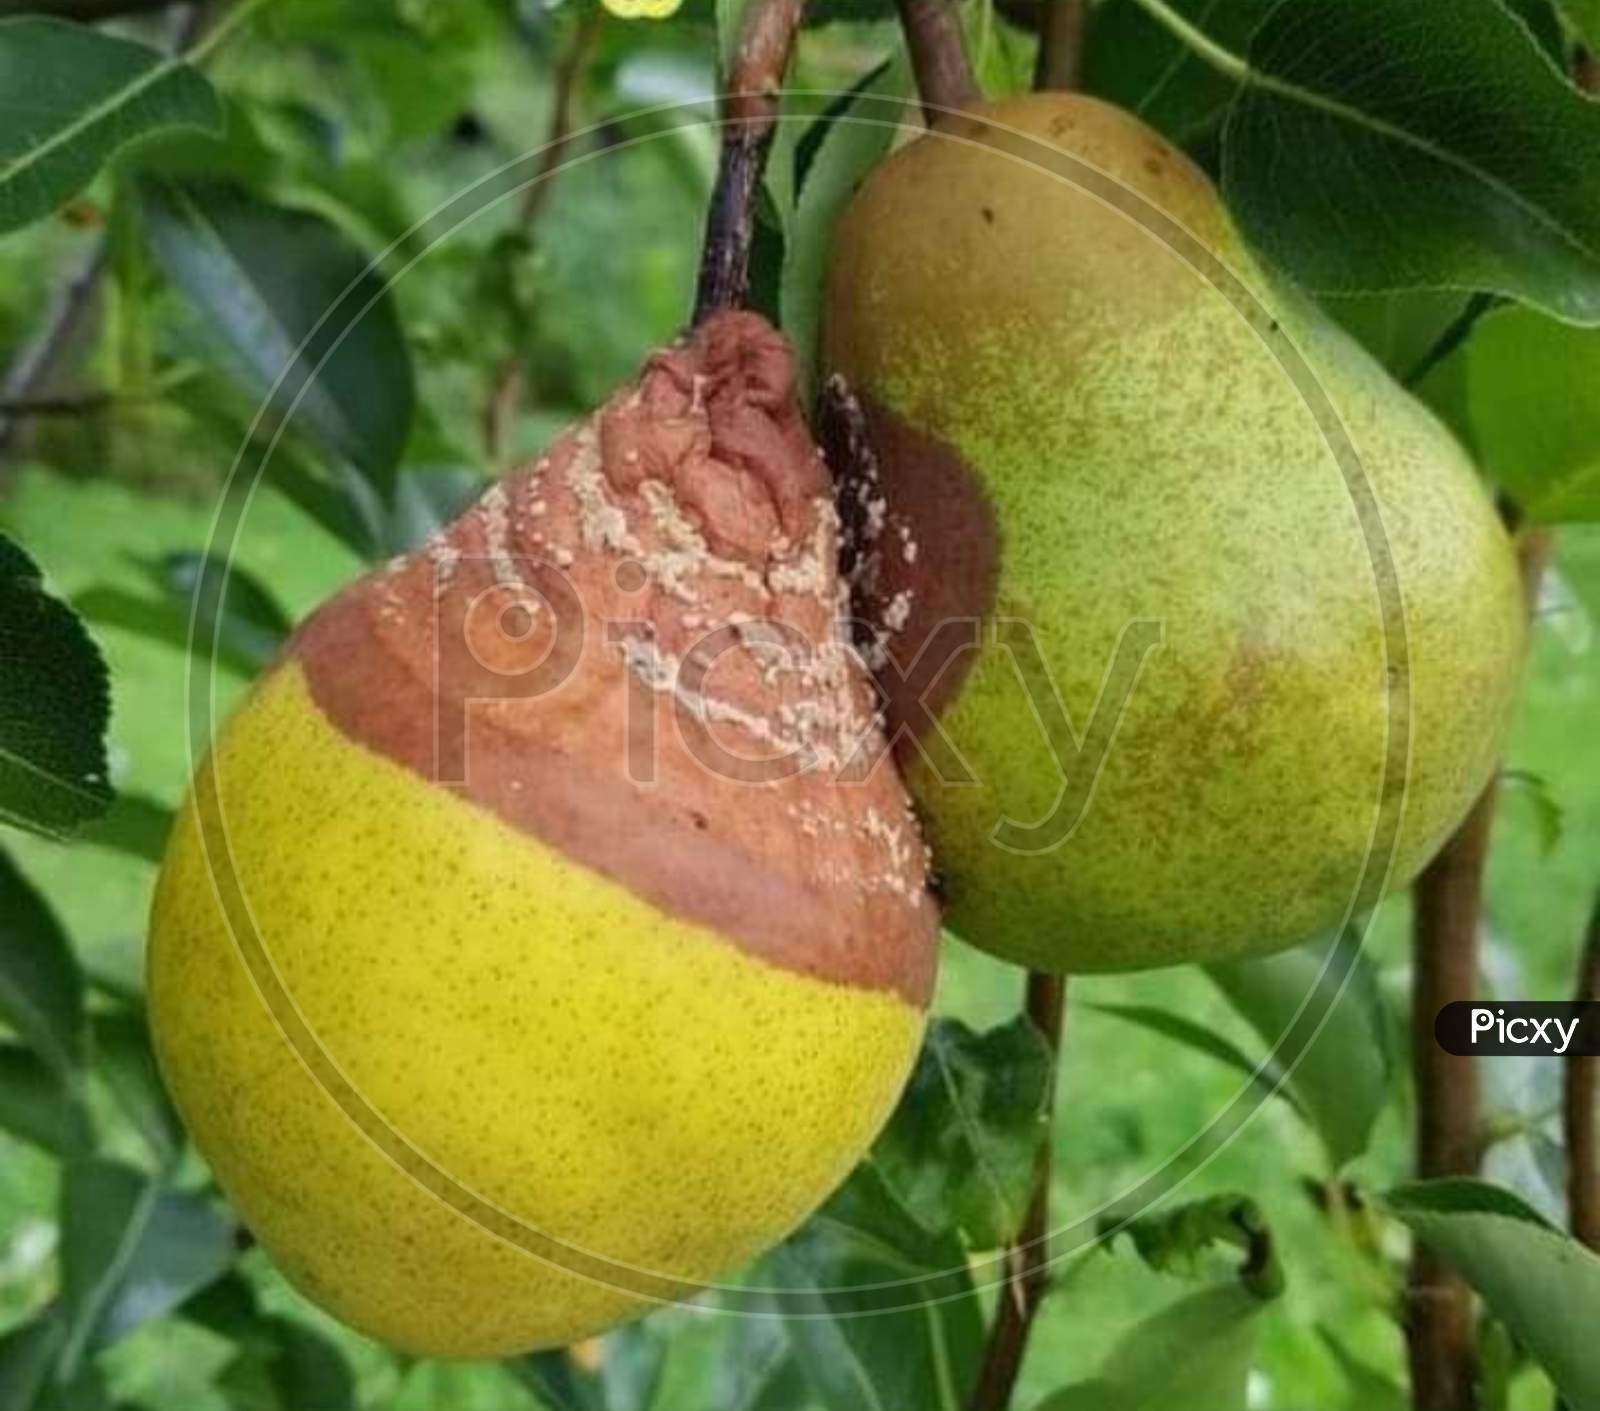 Two rotted pear fruits.